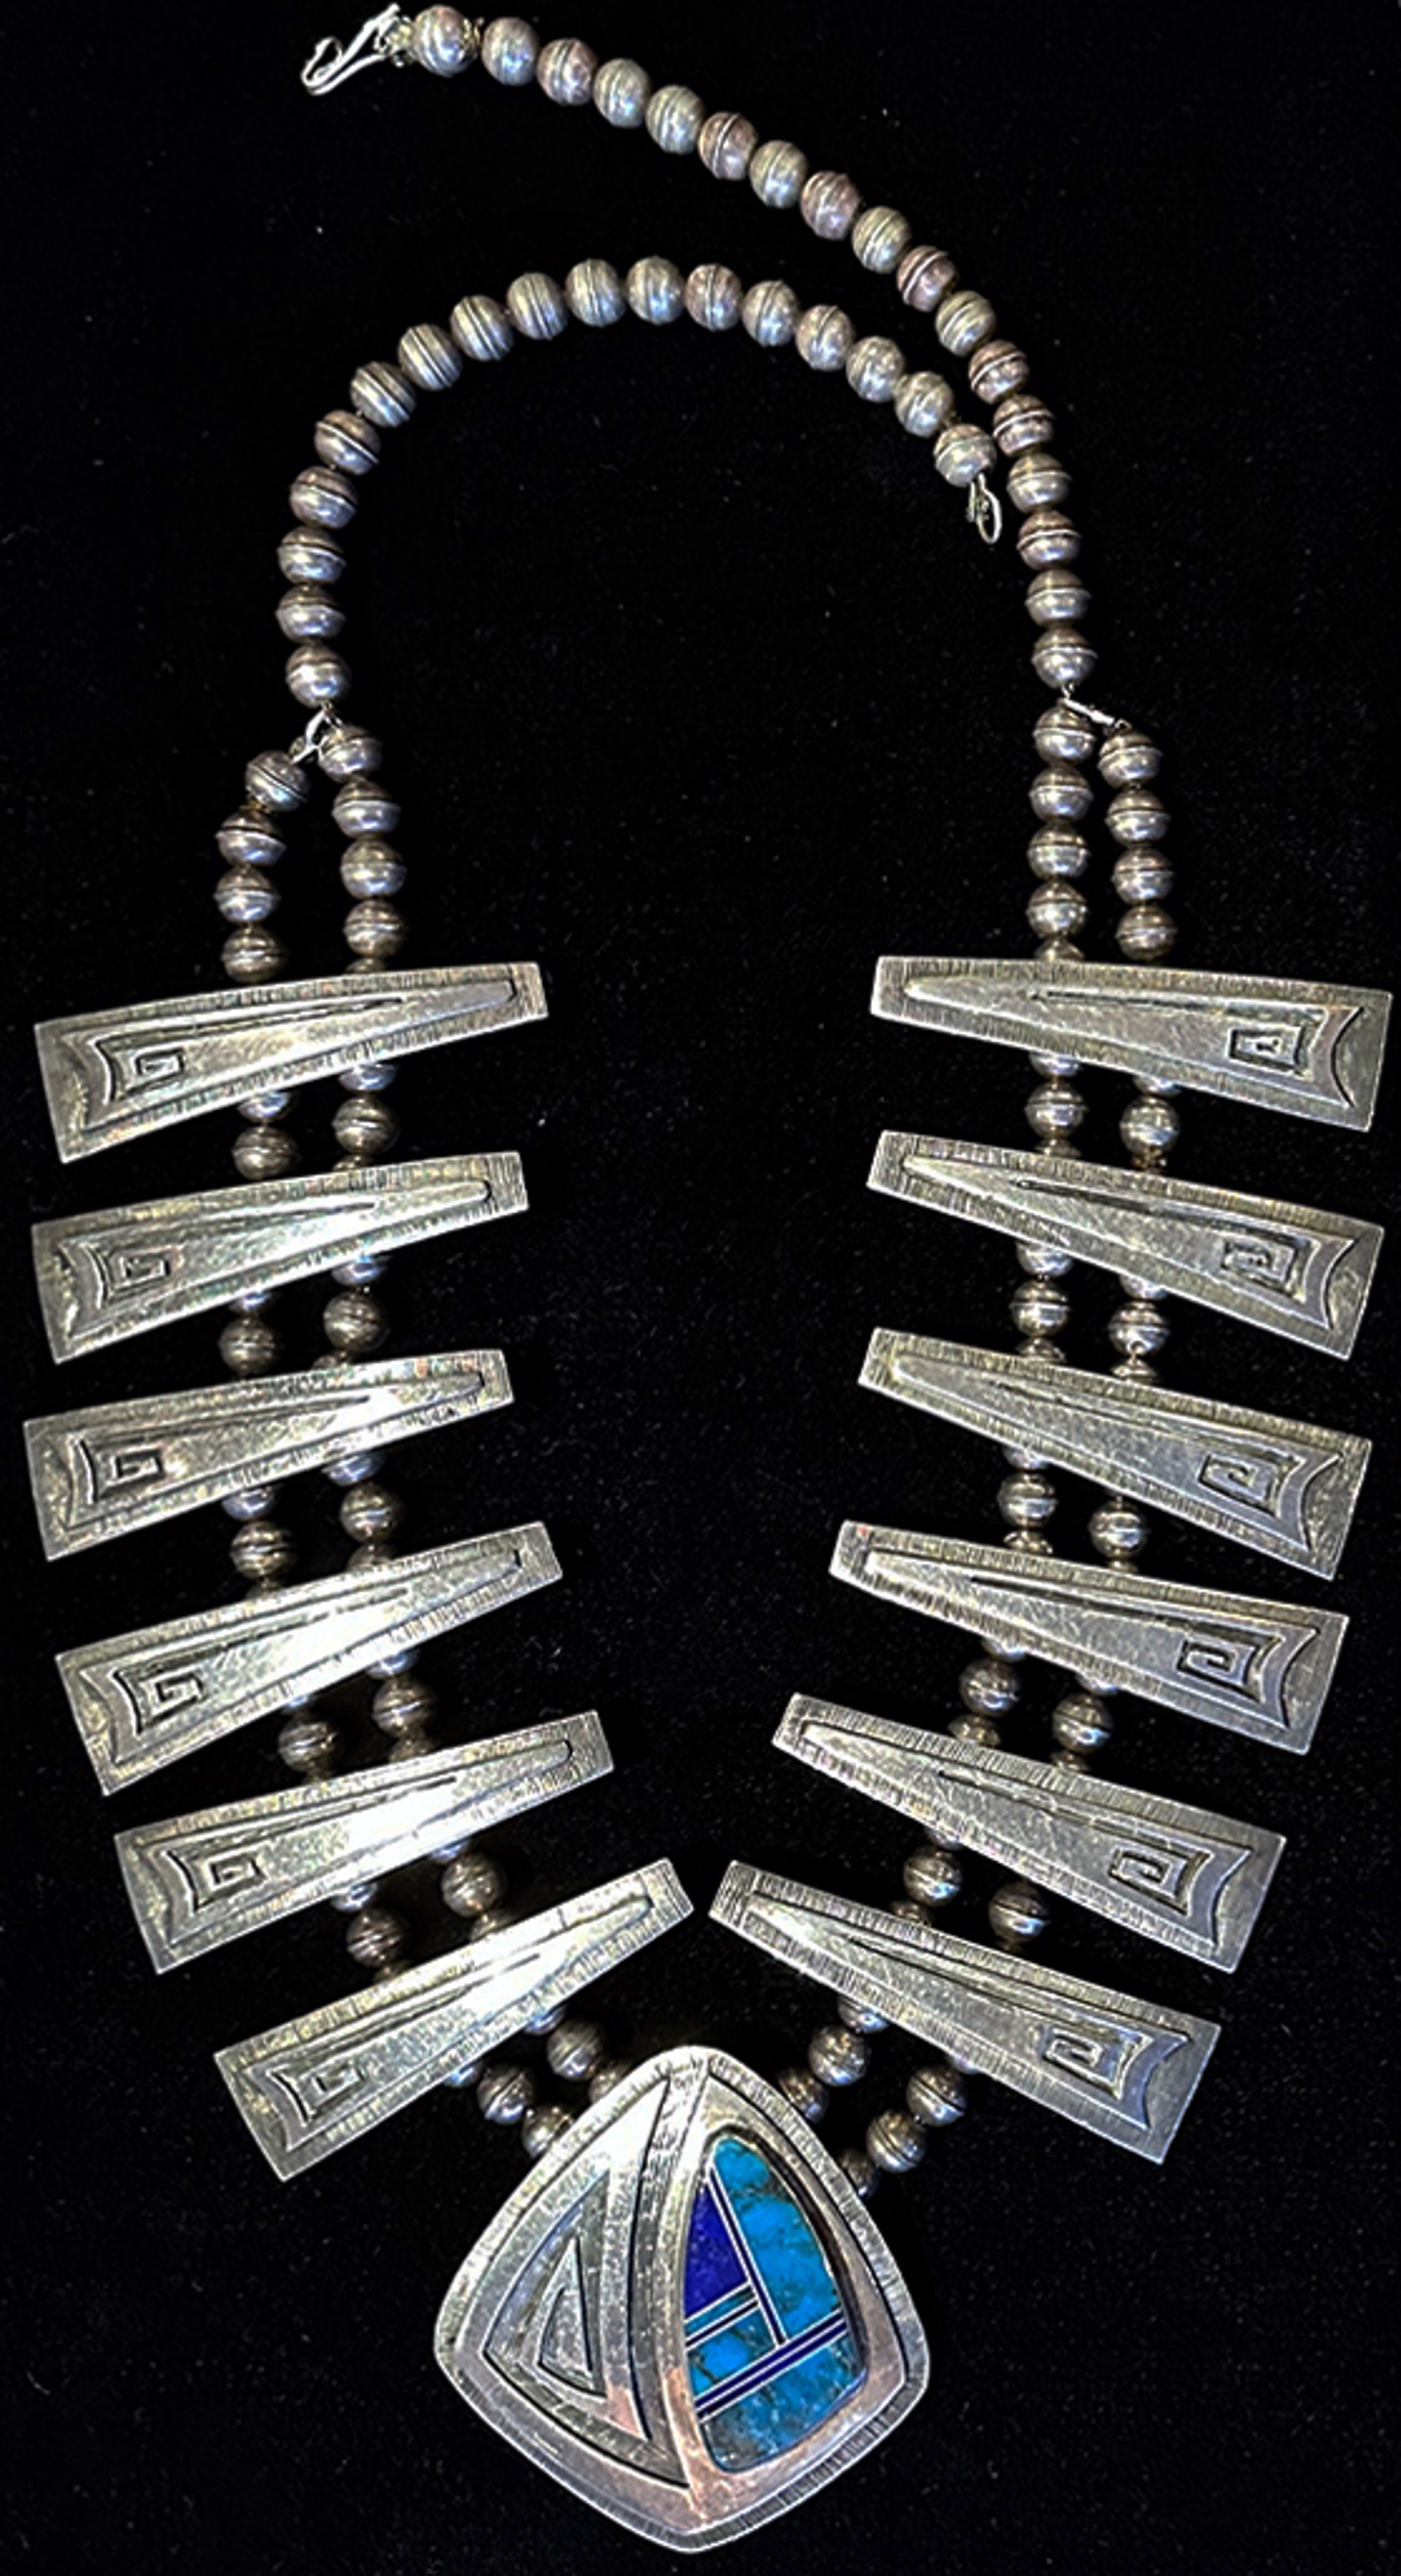 Vintage 1970s Hopi Squash Blossom Necklace and Earrings Set